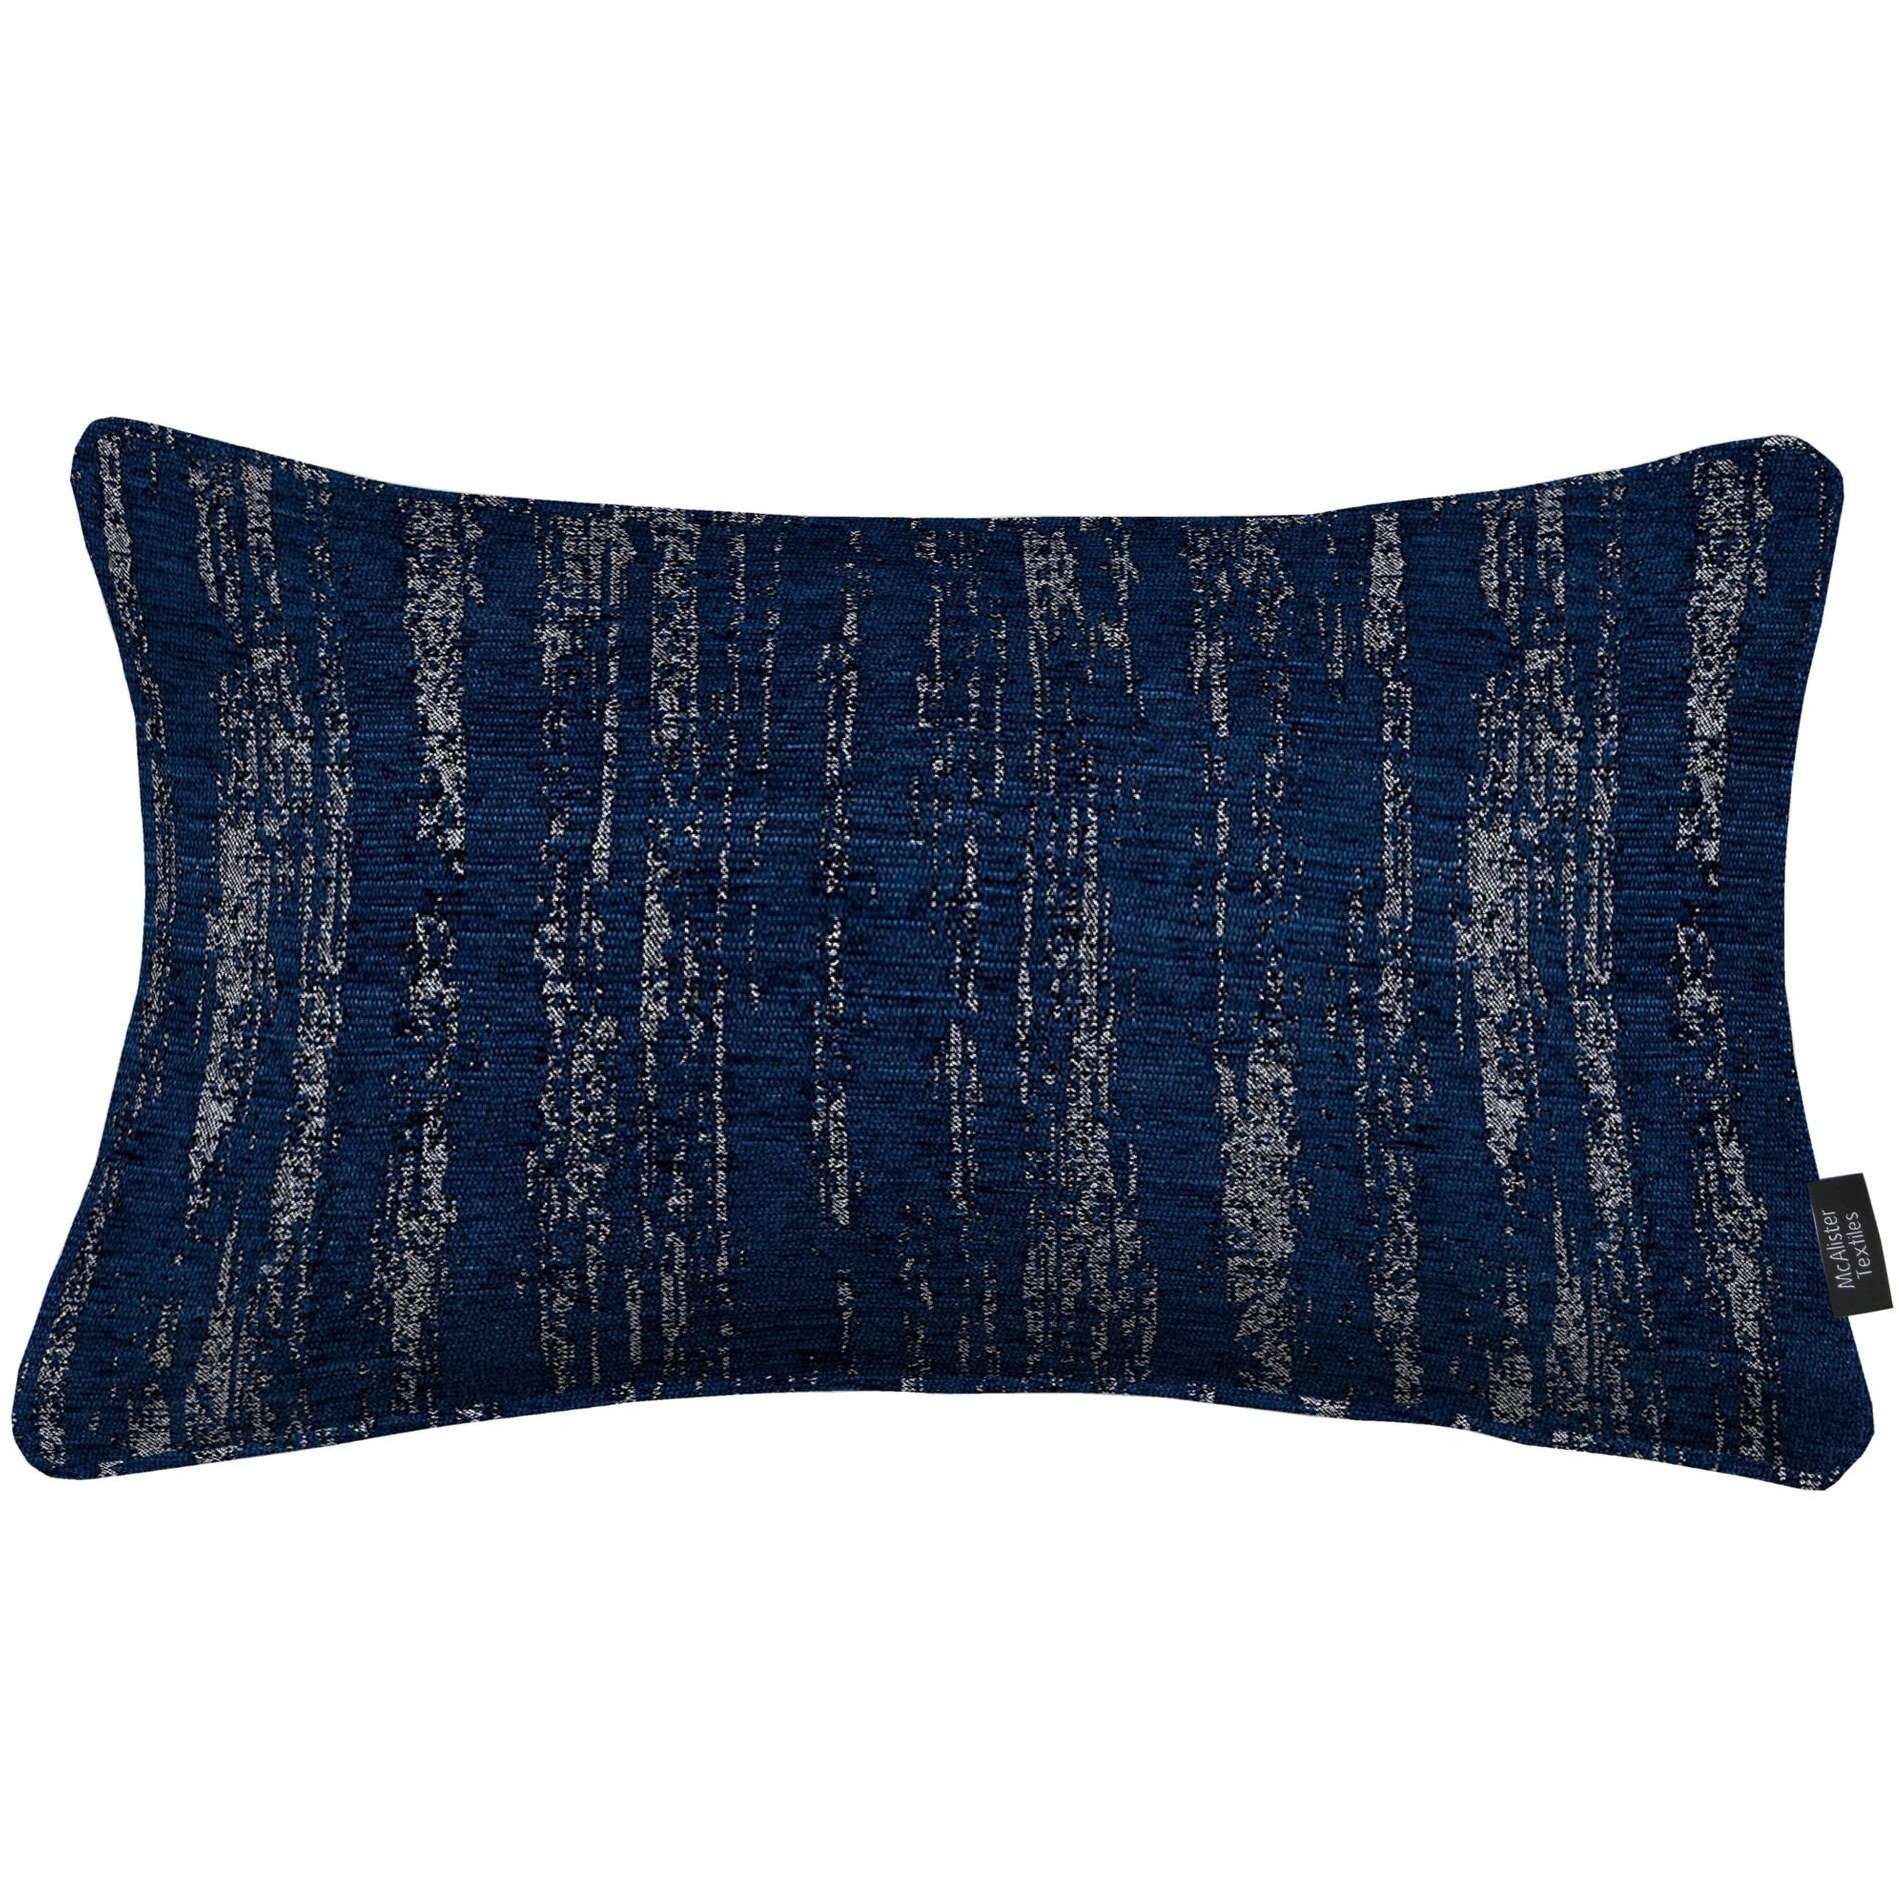 McAlister Textiles Textured Chenille Navy Blue Pillow Pillow Cover Only 50cm x 30cm 